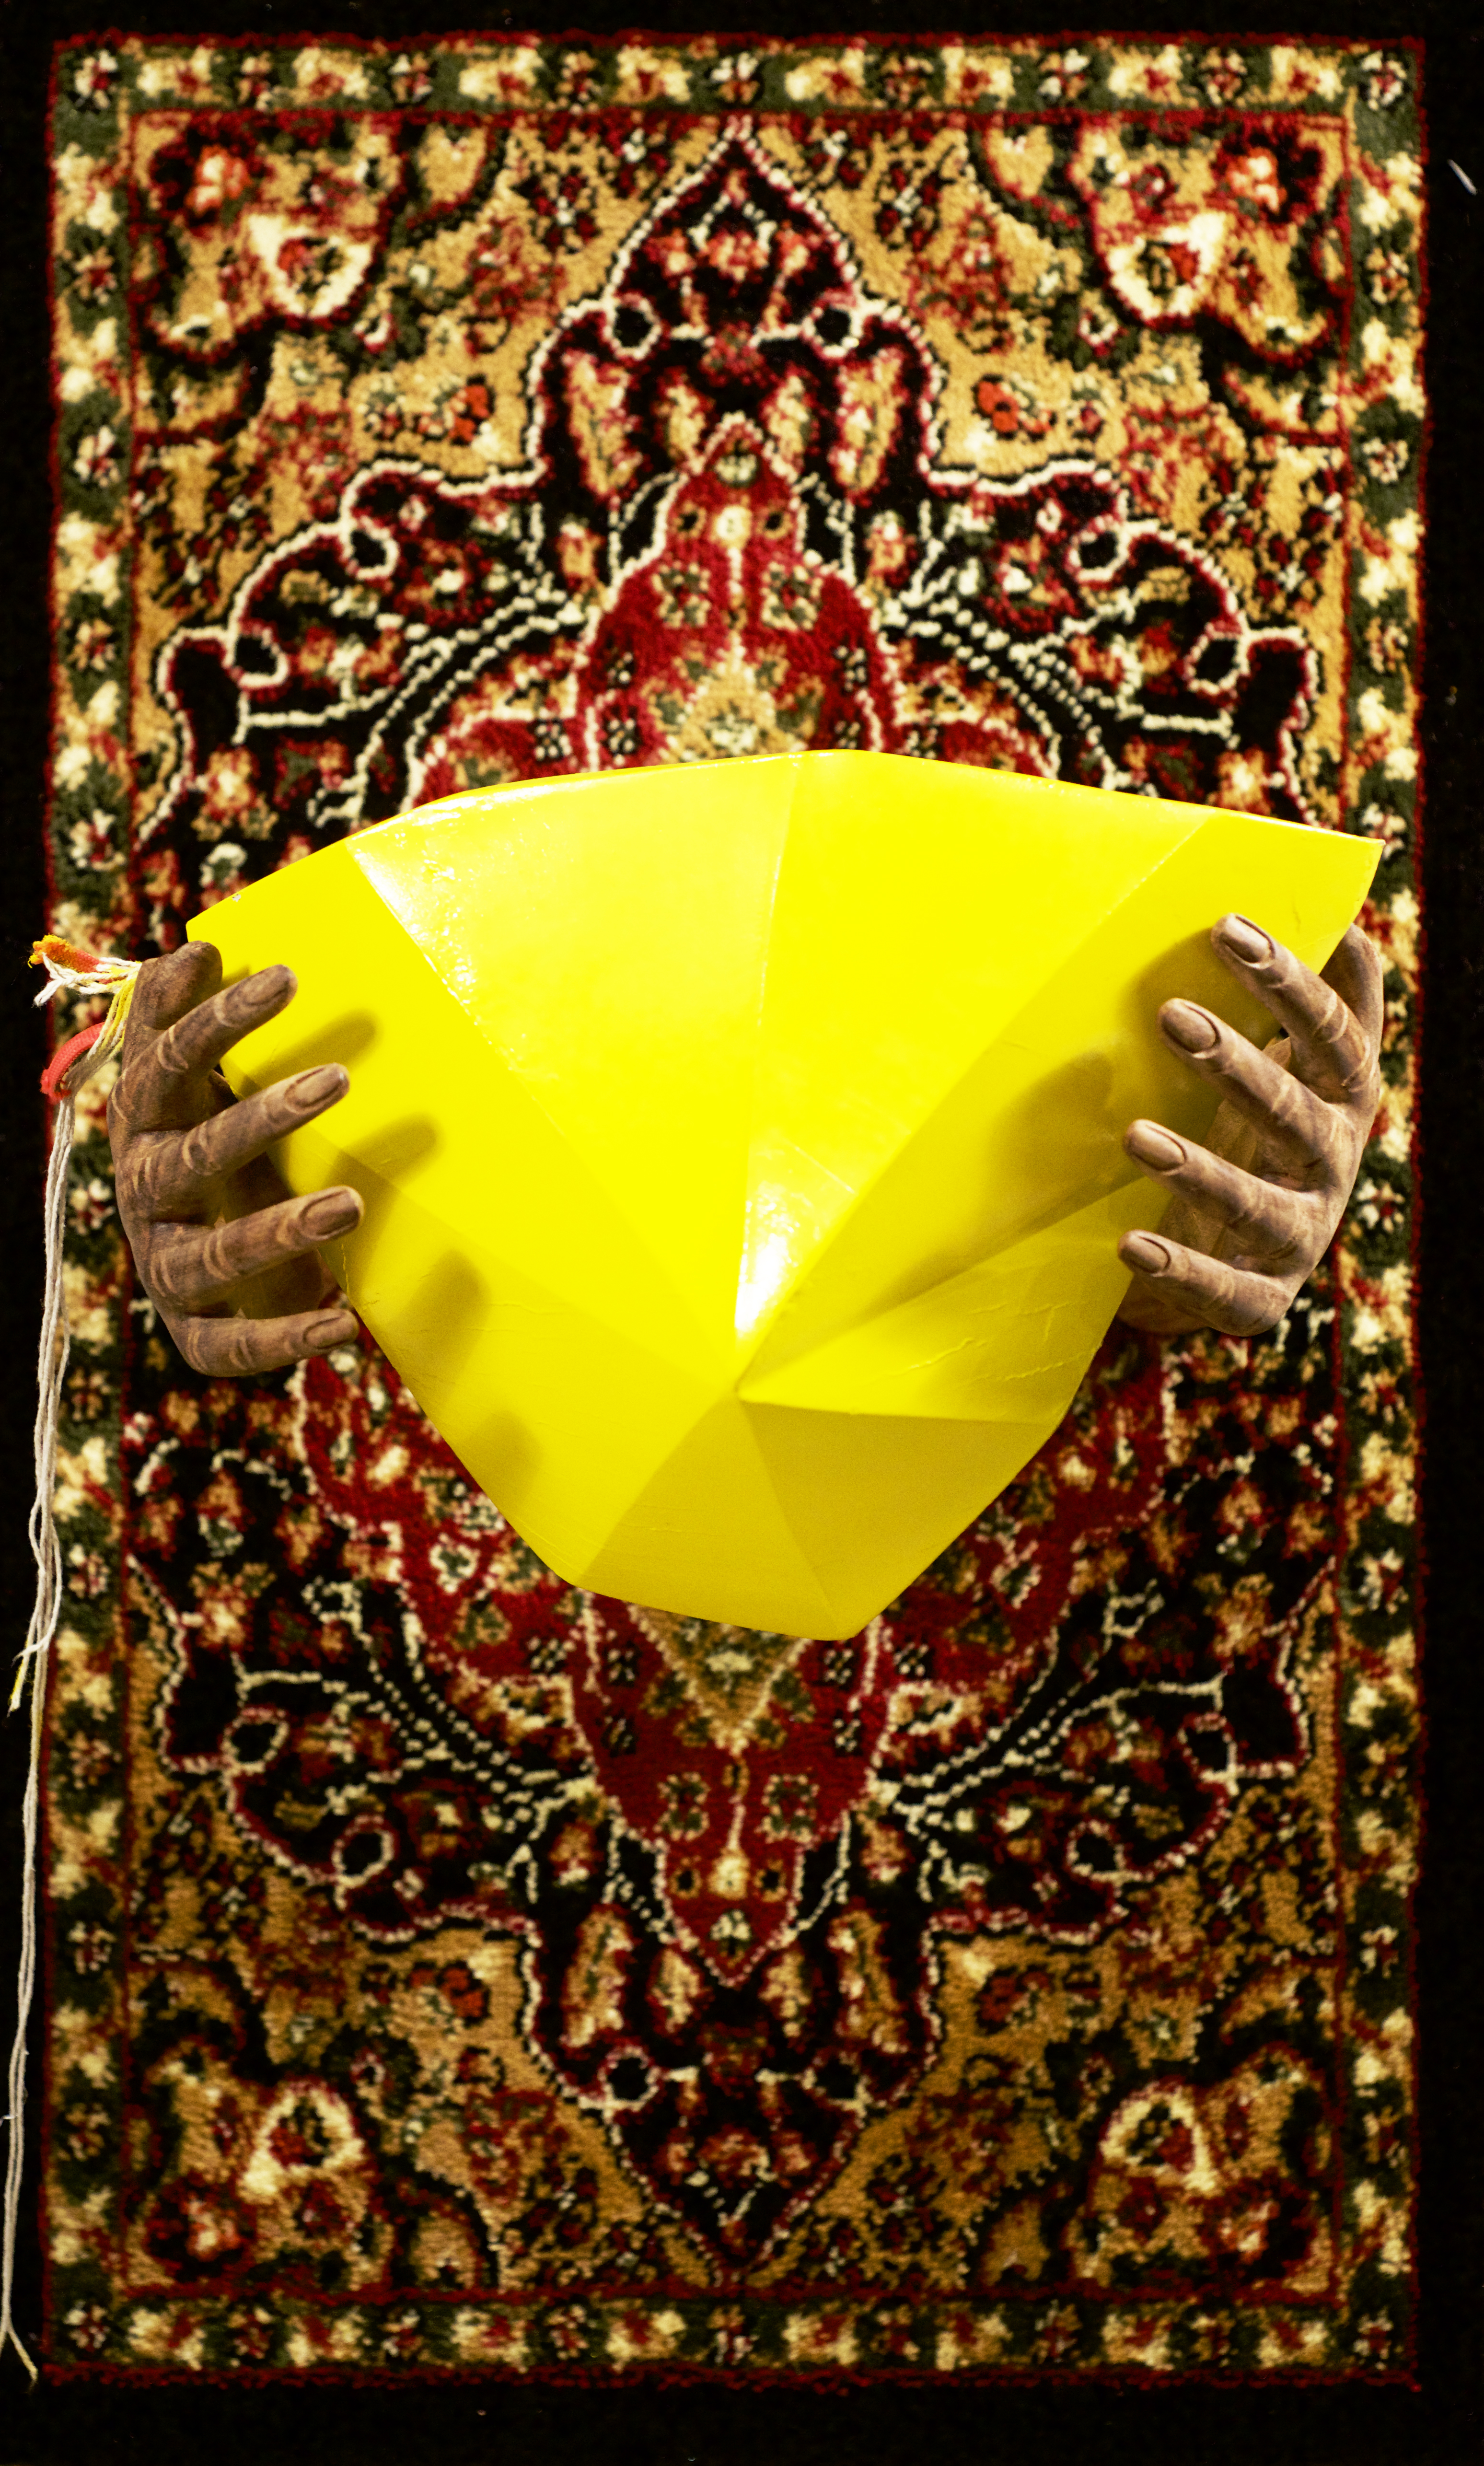  Brown hands with yellow Diamond  28x24 inch Wood sculpture and carpet 2017-2018 